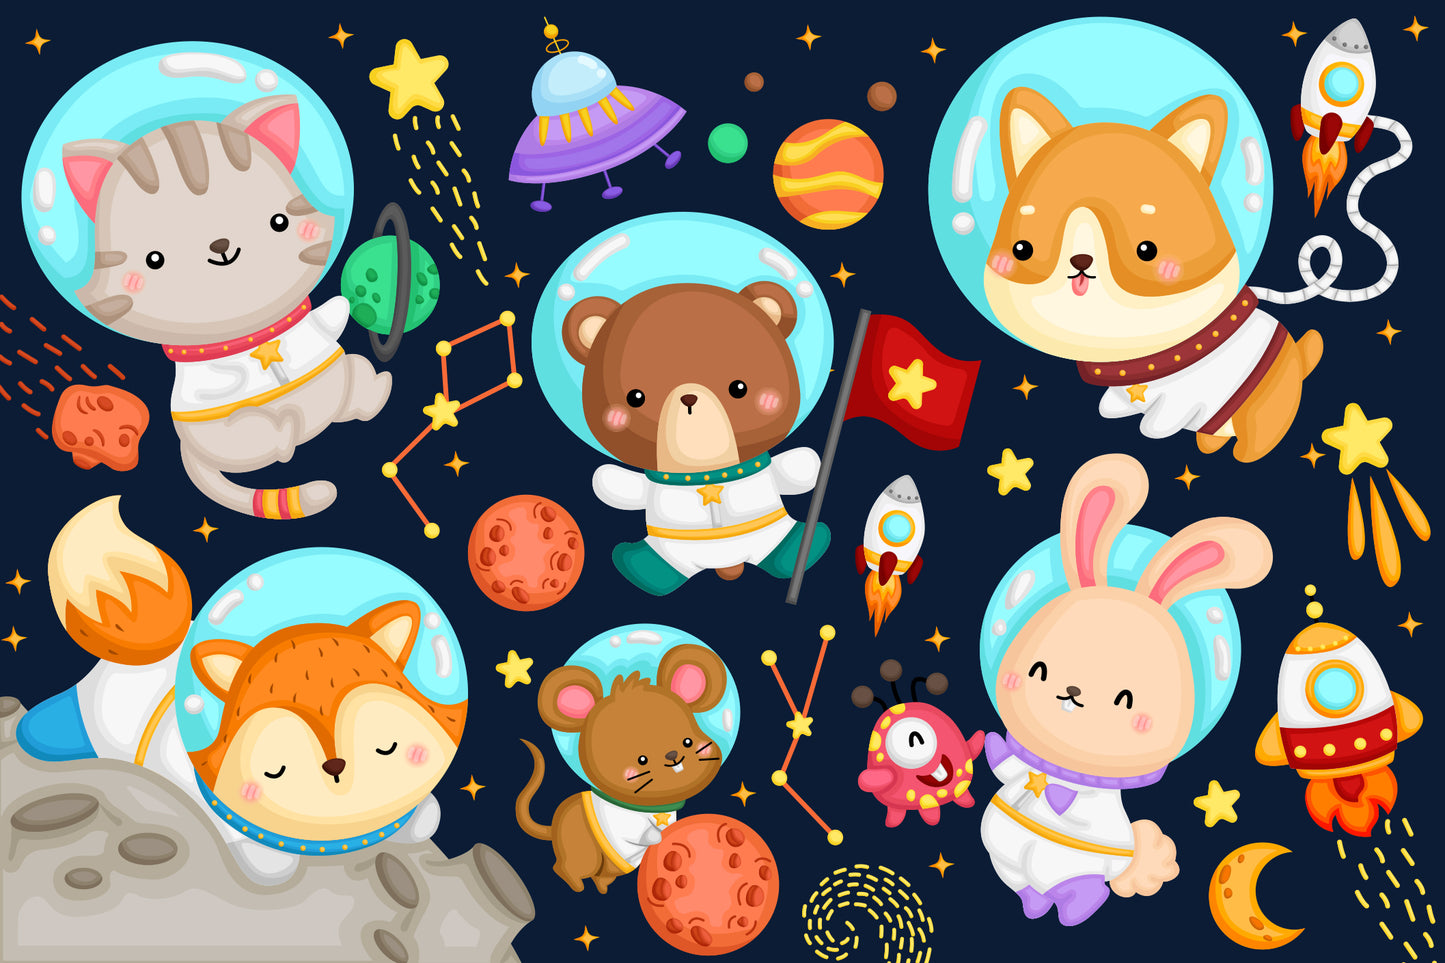 Animals Astronauts Galaxy and Space Clipart